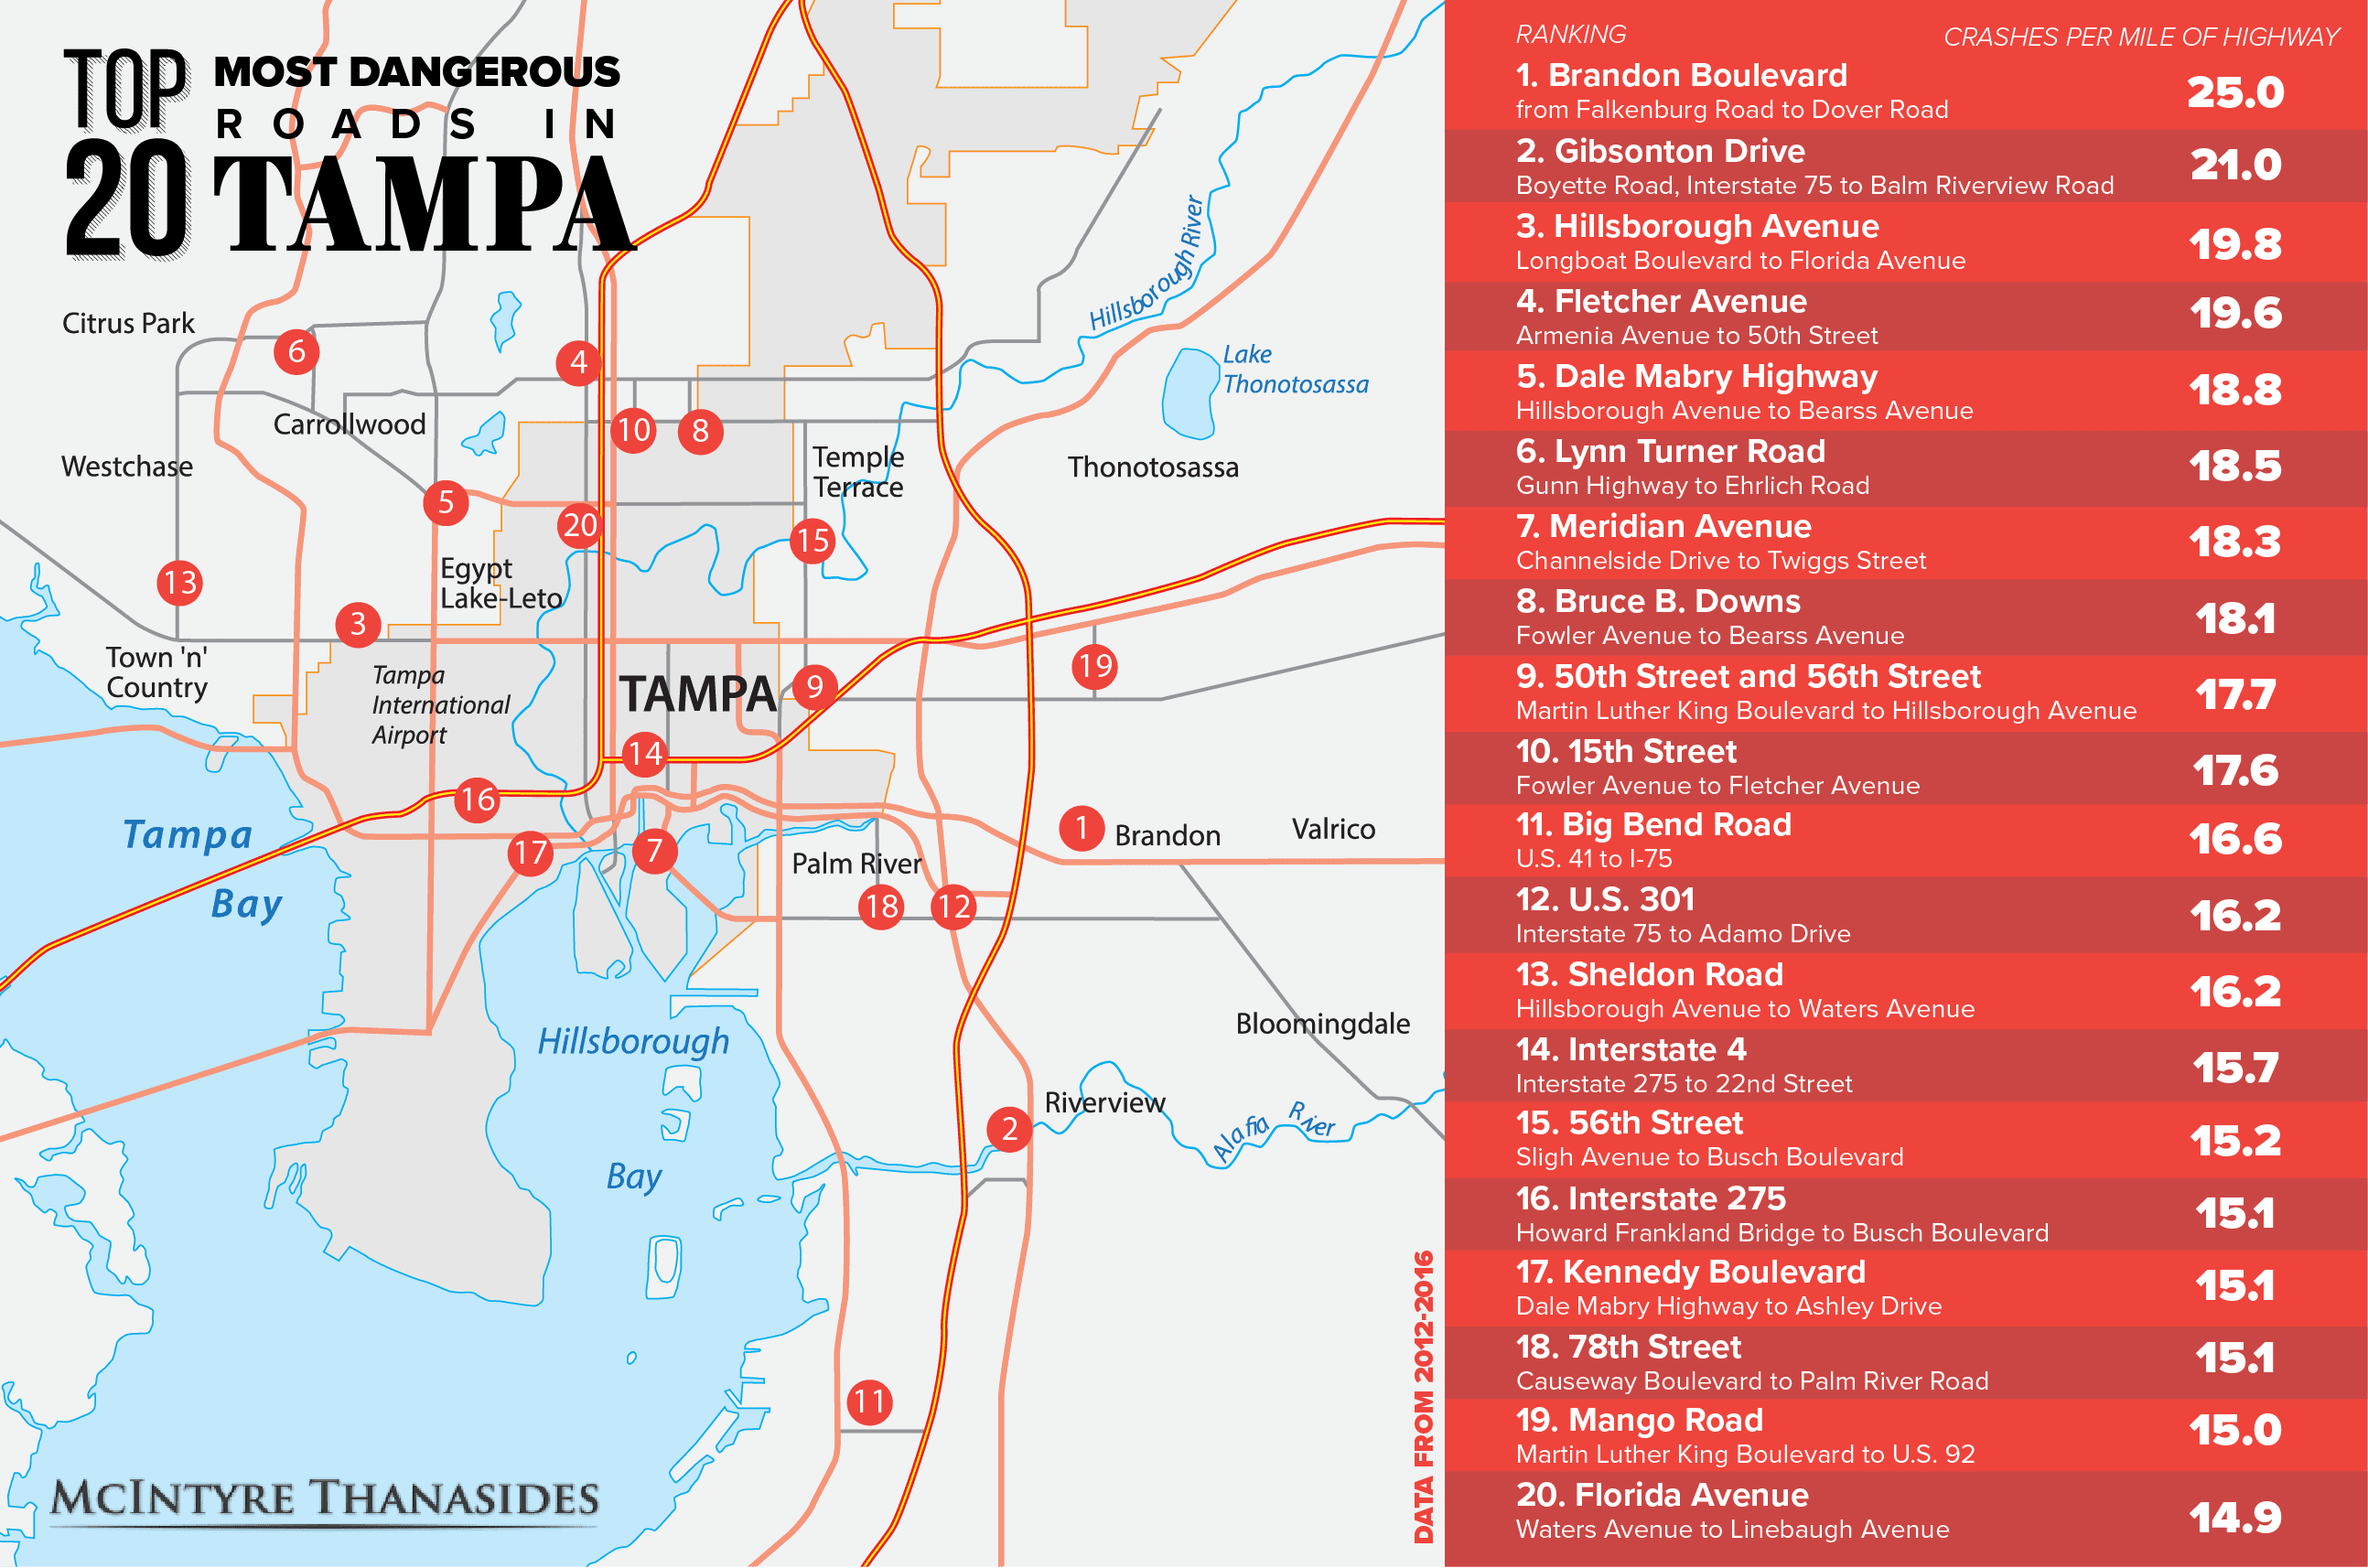 The top 20 most dangerous roads in Tampa (Infographic)